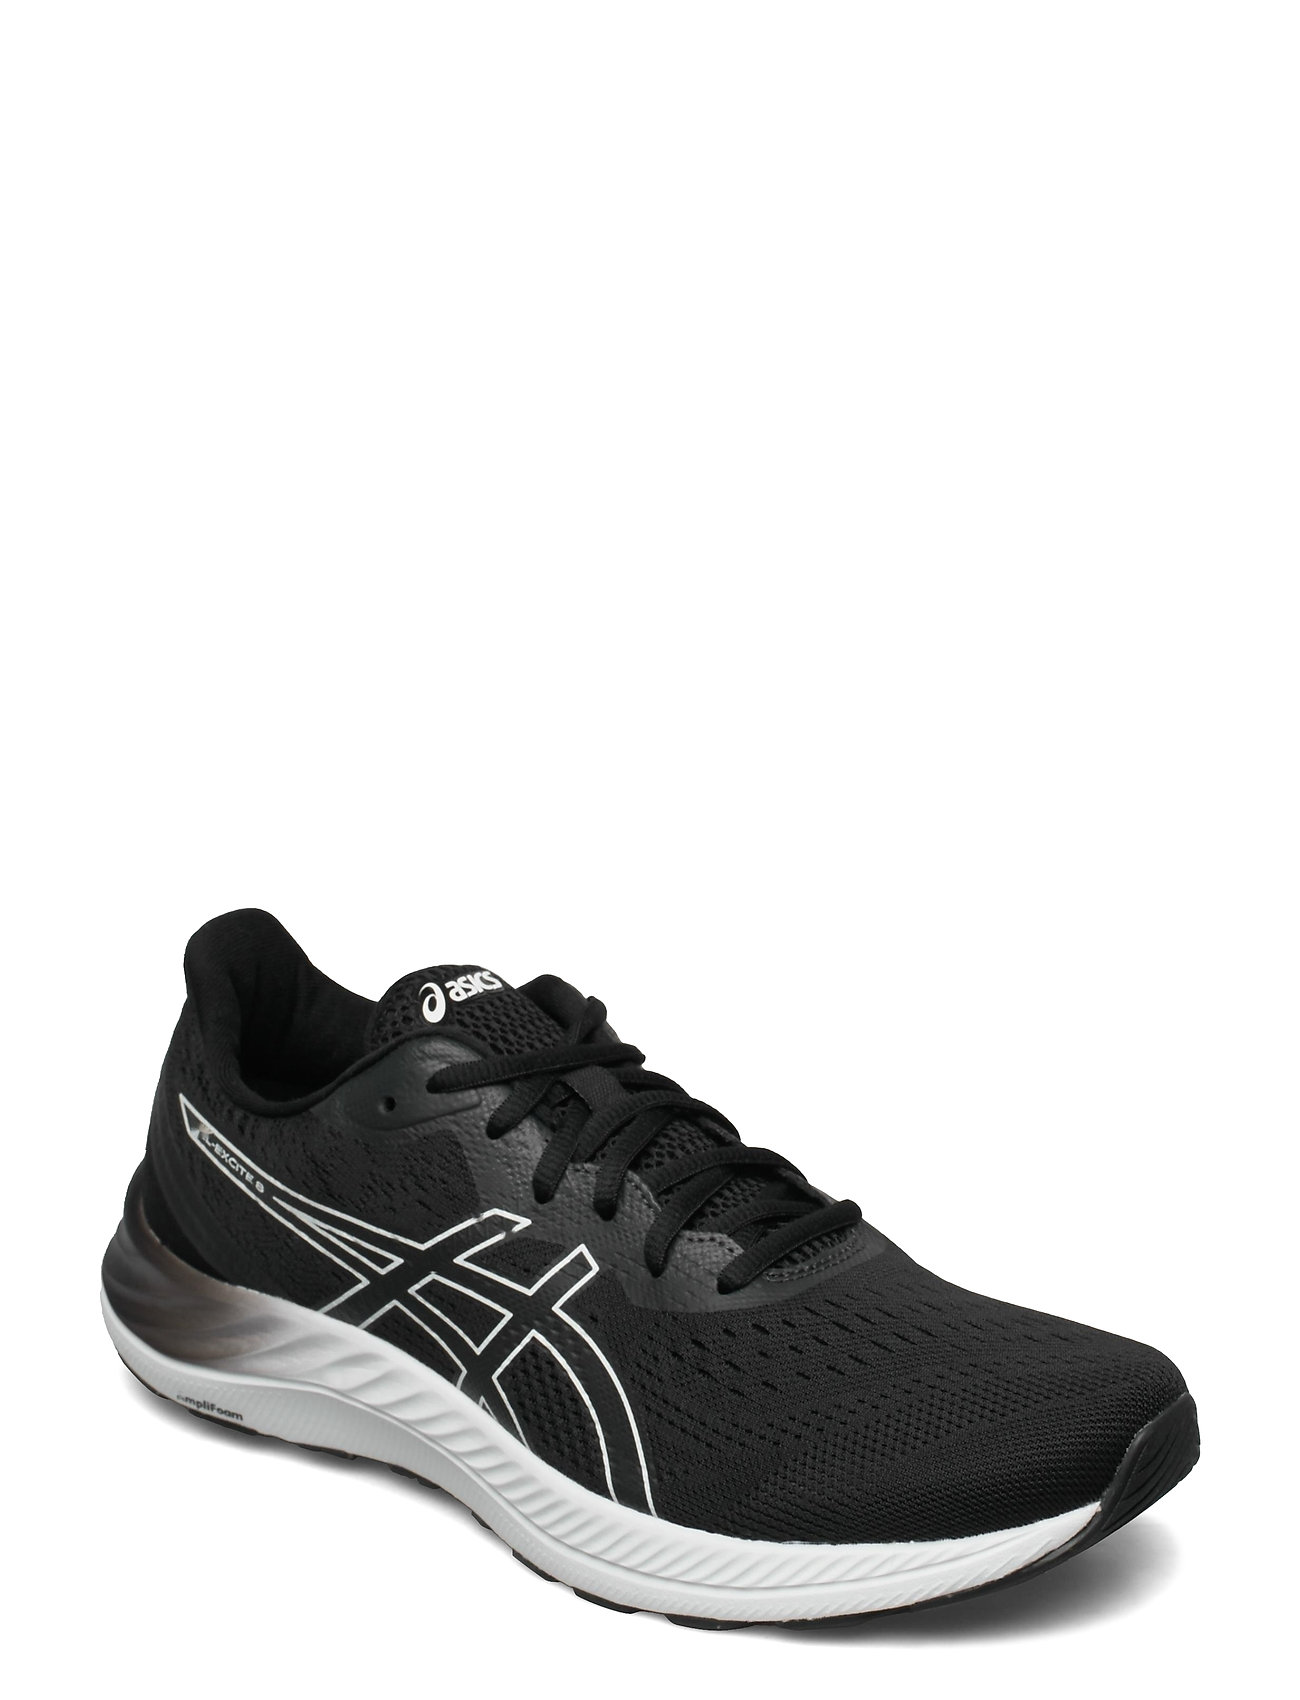 Gel-Excite 8 Shoes Sport Shoes Running Shoes Musta Asics